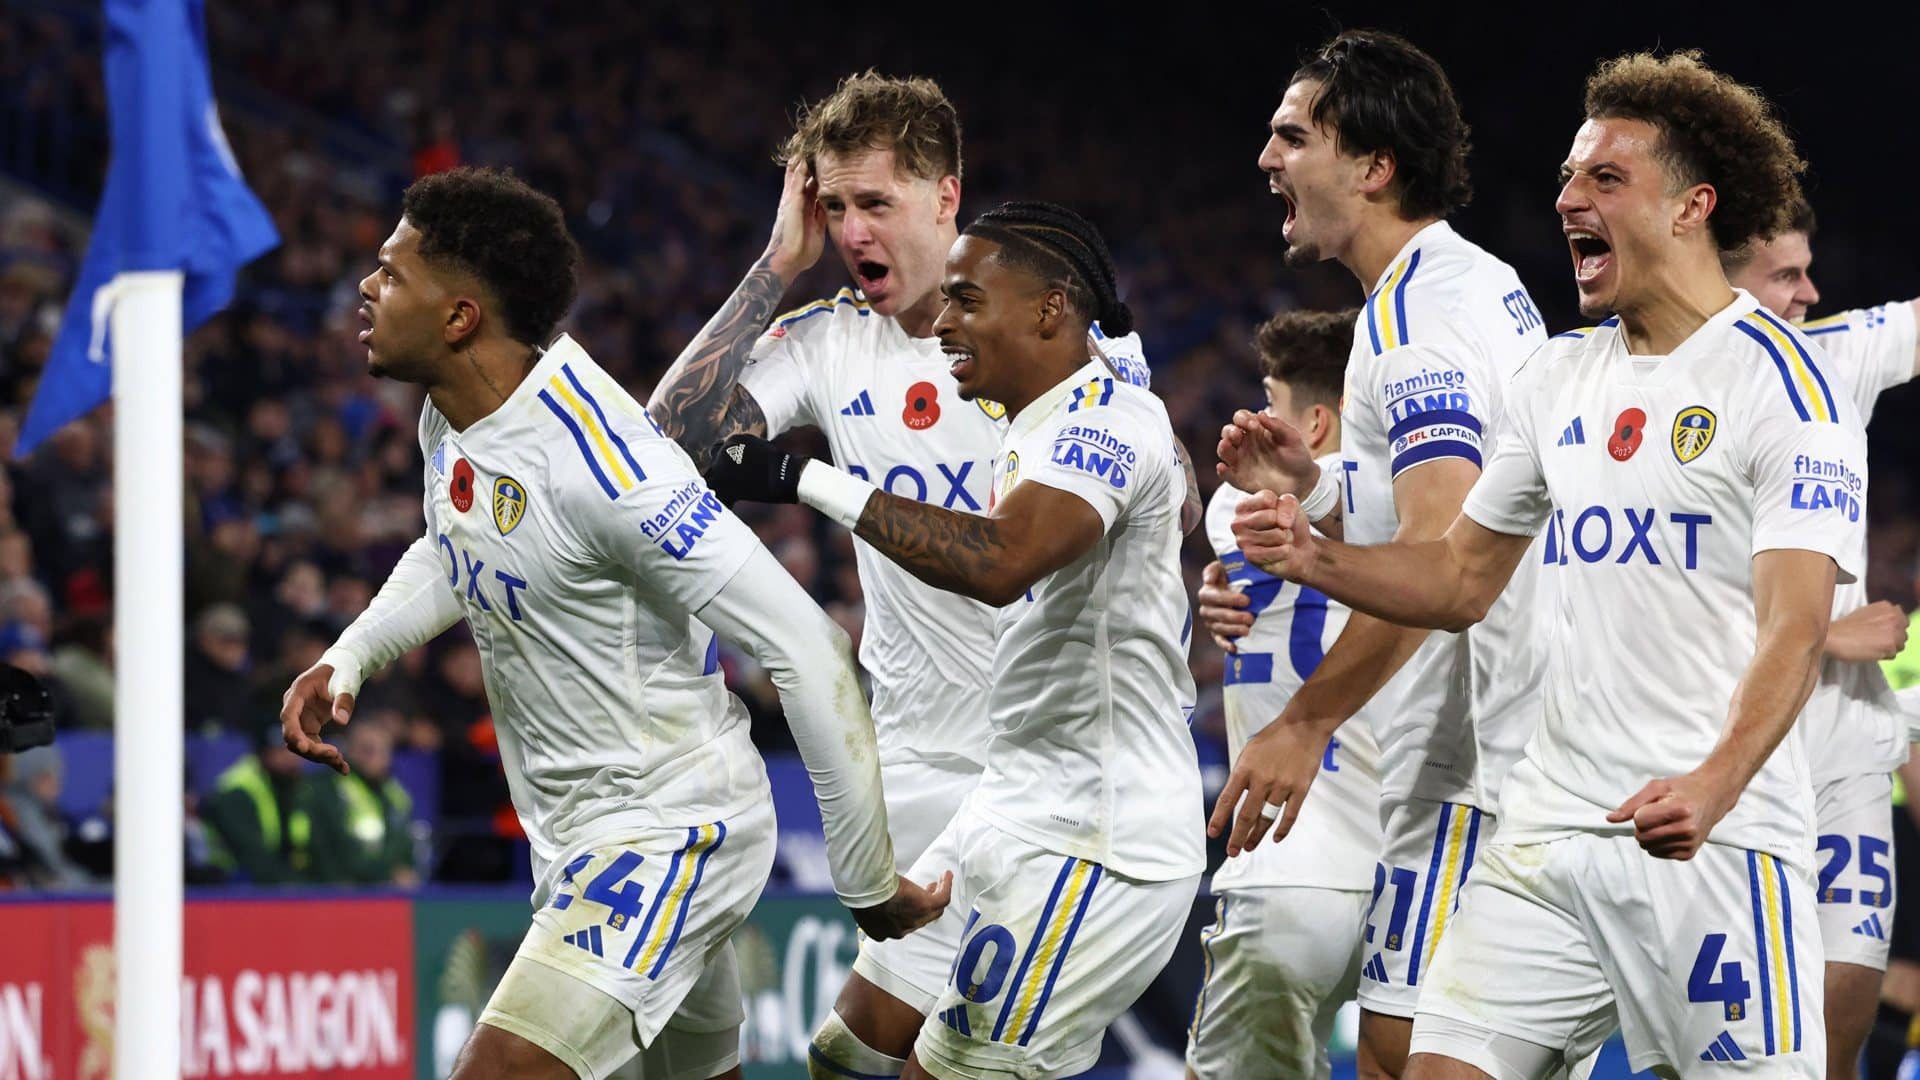 It's pretty much the whole damn Leeds team, led by Georginio Rutter, celebrating the goal at Leicester